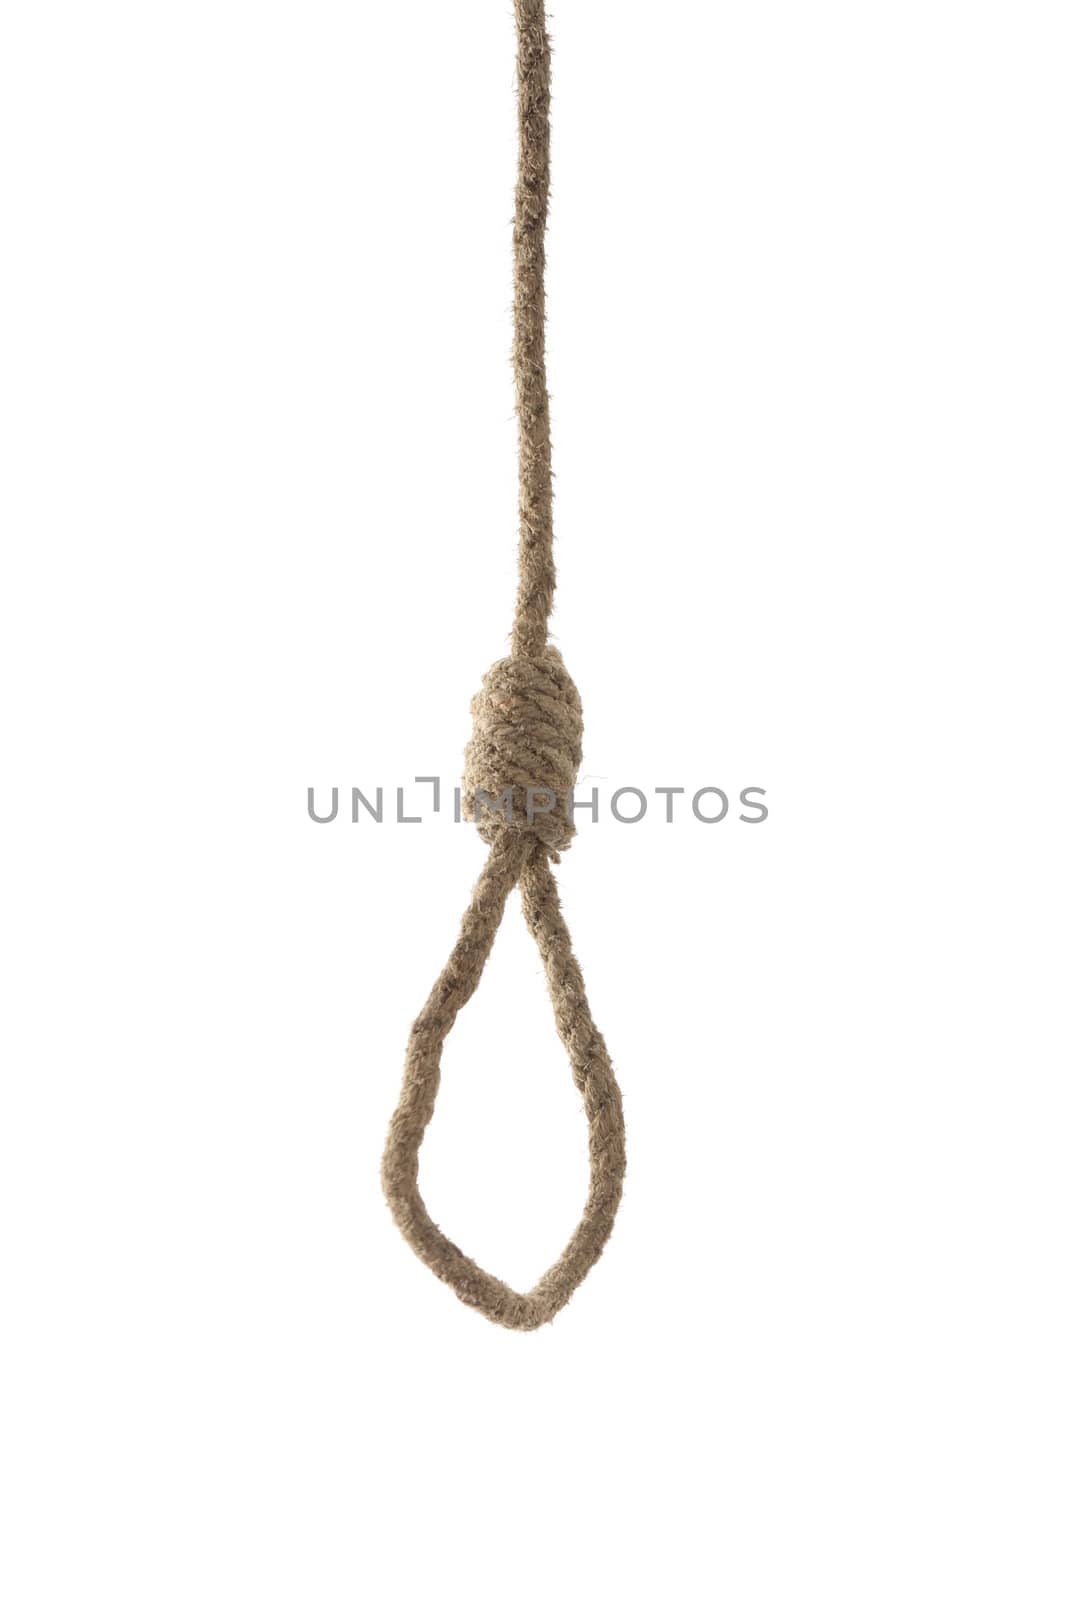 Details of a gallows on white background